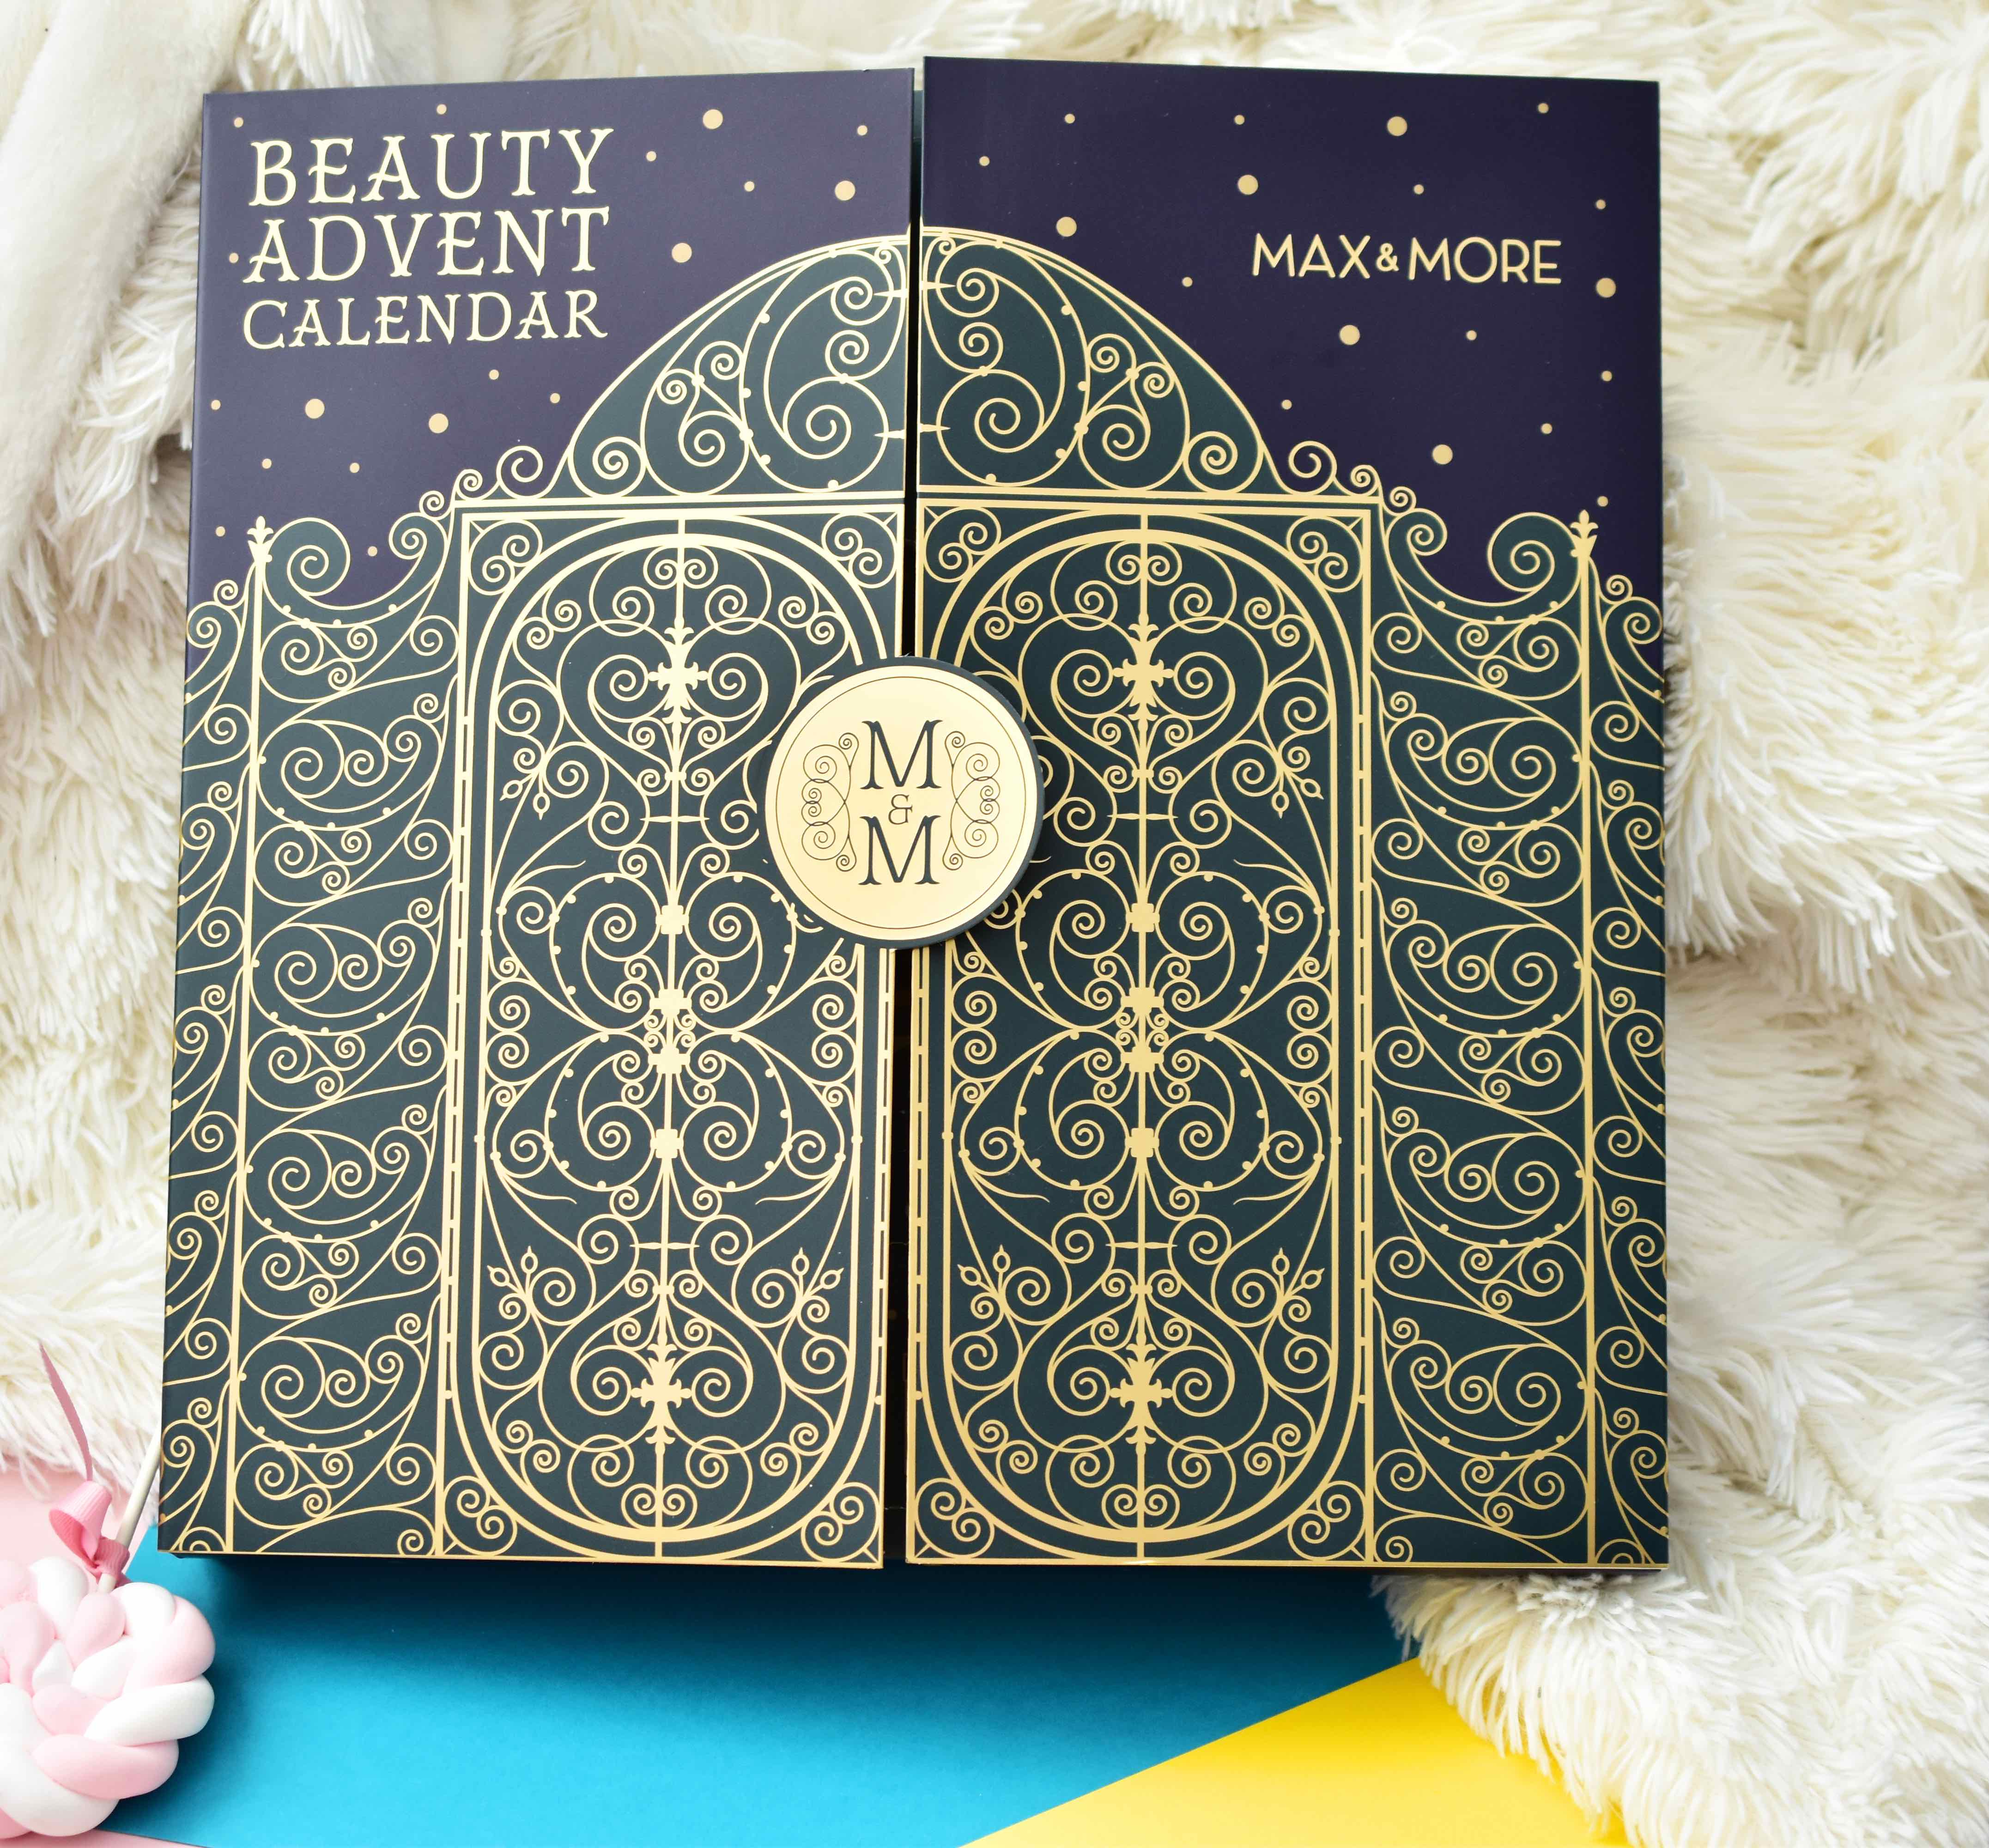 Max and More Beauty Advent Calendar